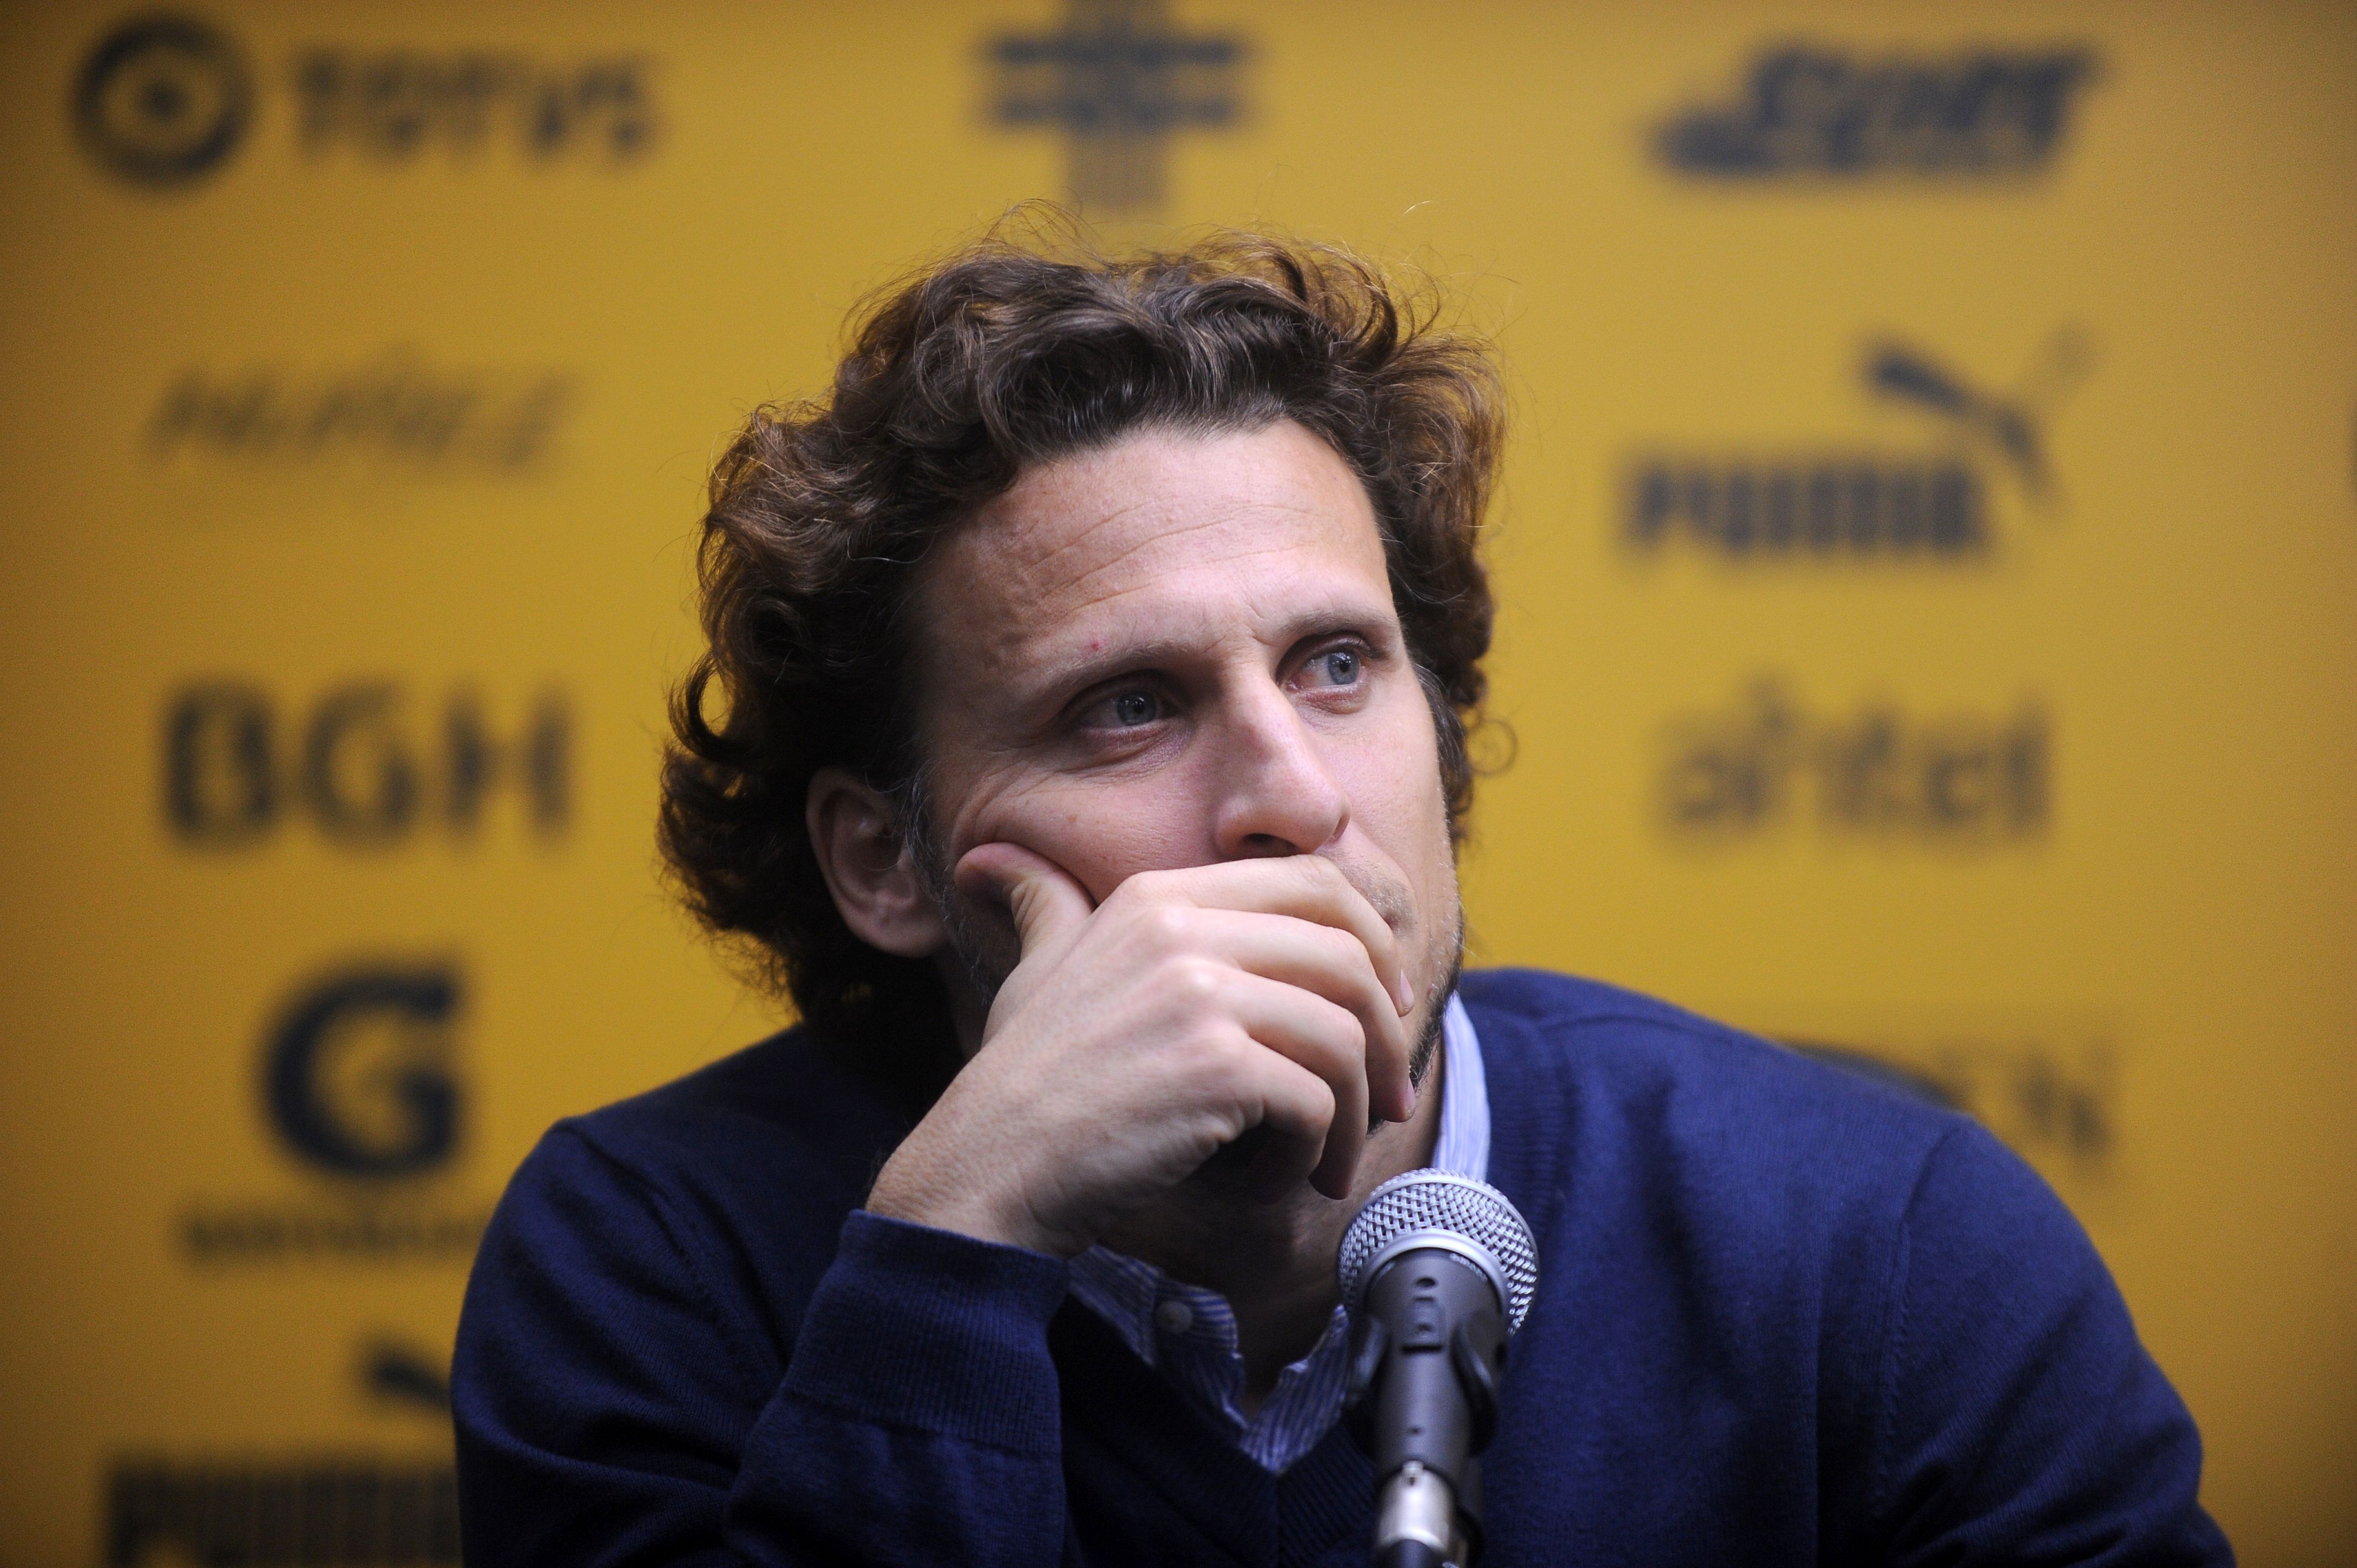 Uruguayan footballer Diego Forlan delivers a press conference on June 14, 2016, in Montevideo. 
Forlan, 37, announced he quit Penarol club -which became Uruguayan champion last Sunday- but that he will continue playing.  / AFP / MIGUEL ROJO        (Photo credit should read MIGUEL ROJO/AFP/Getty Images)